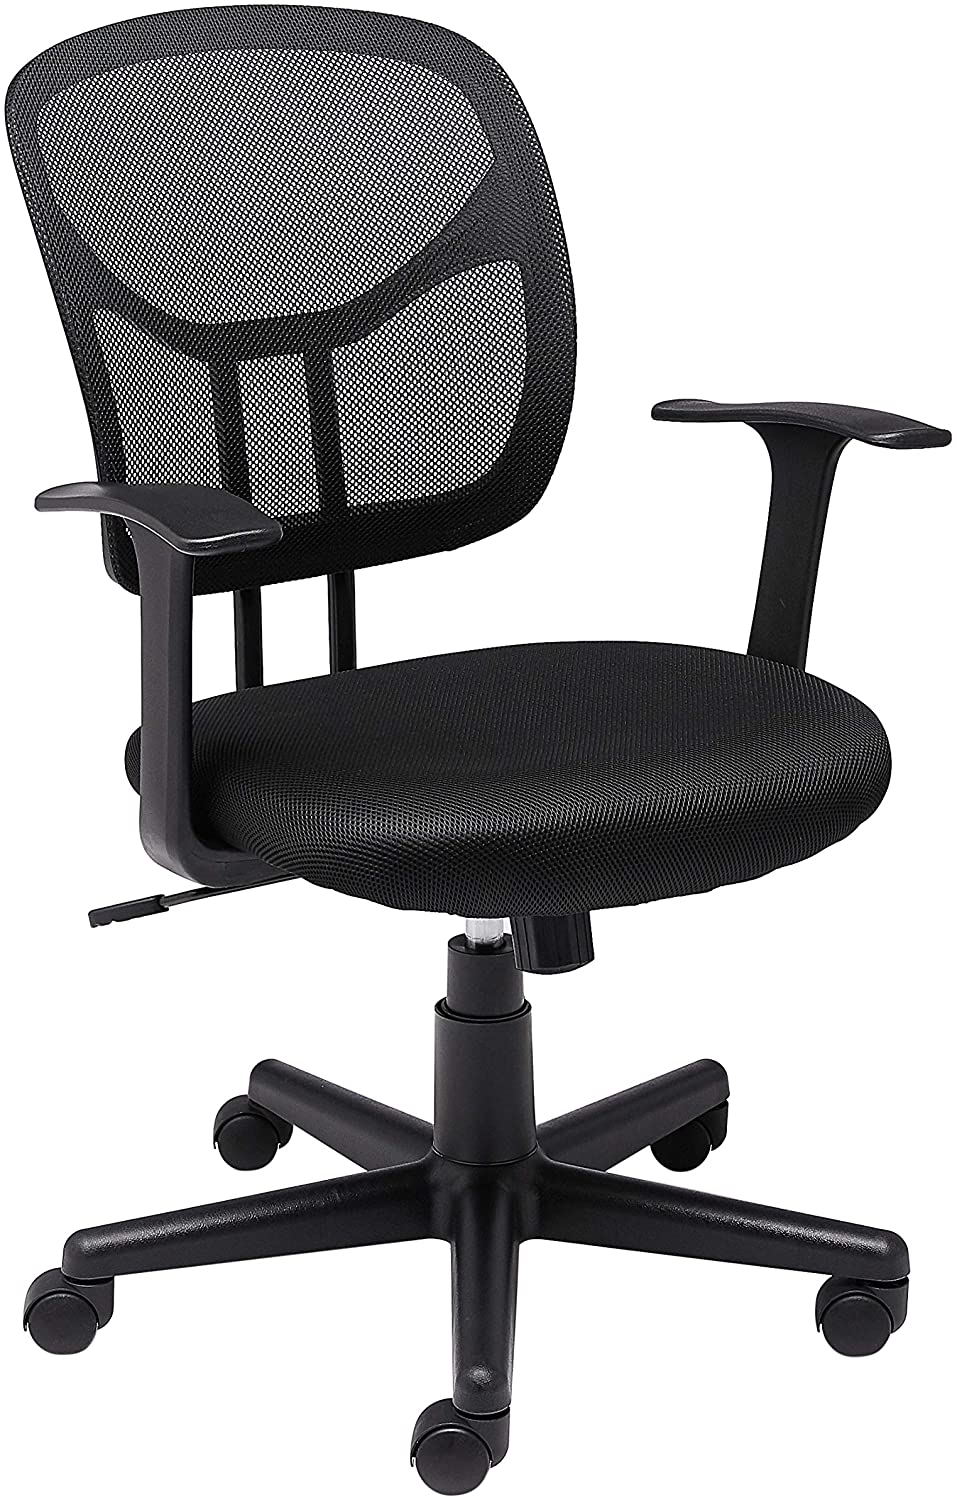 Review of Amazon Basics Mesh, Mid-Back, Adjustable, Swivel Office Desk Chair with Armrests, Black